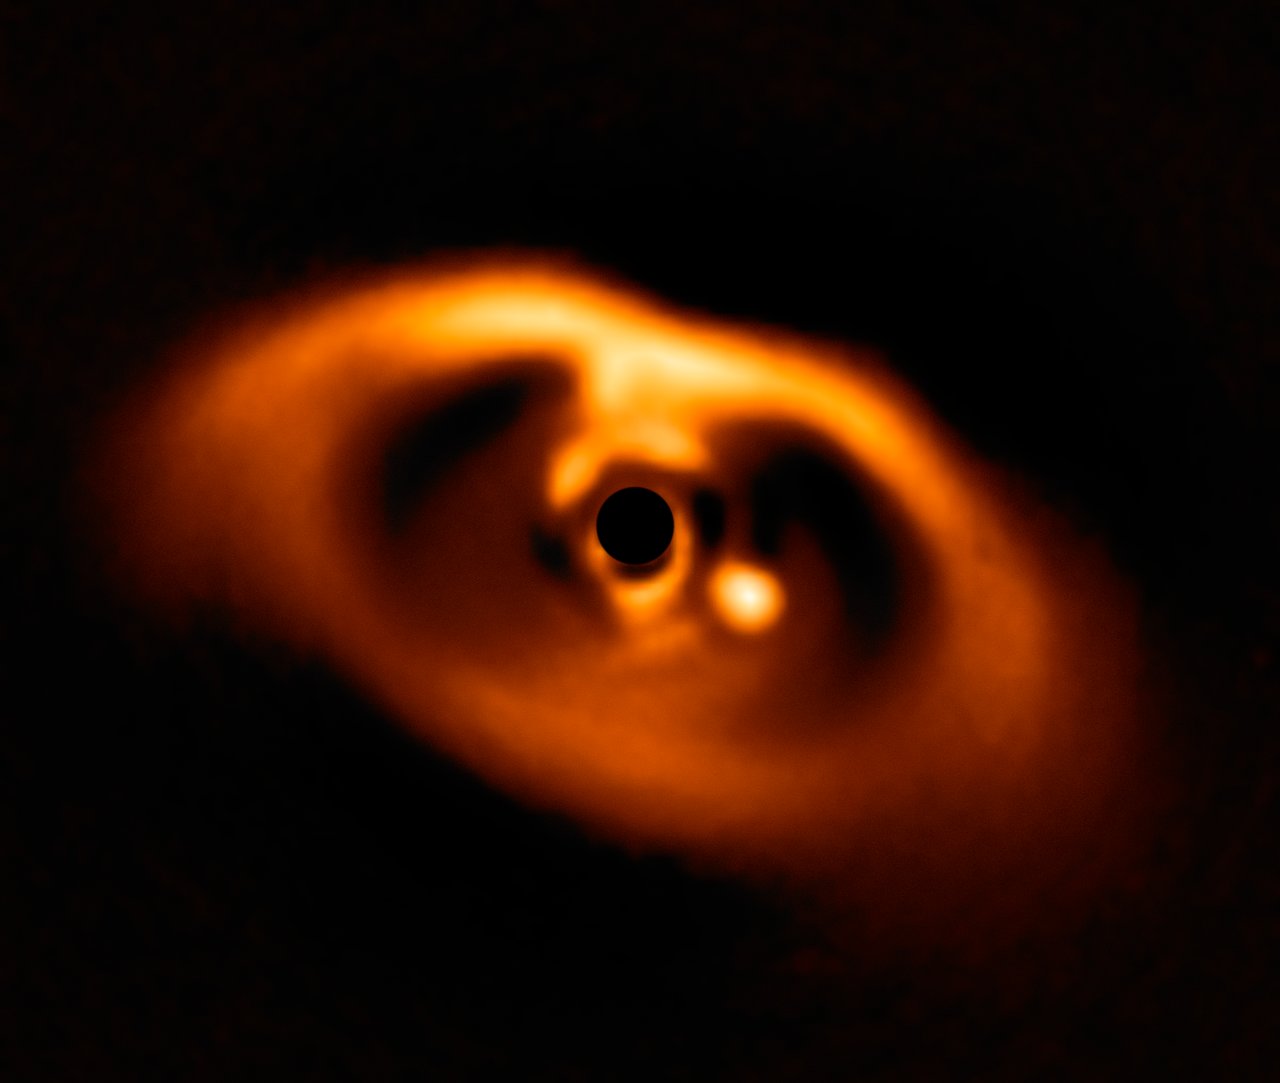 A newborn planet can be seen as a bright spot to the right of the dwarf star PDS 70.